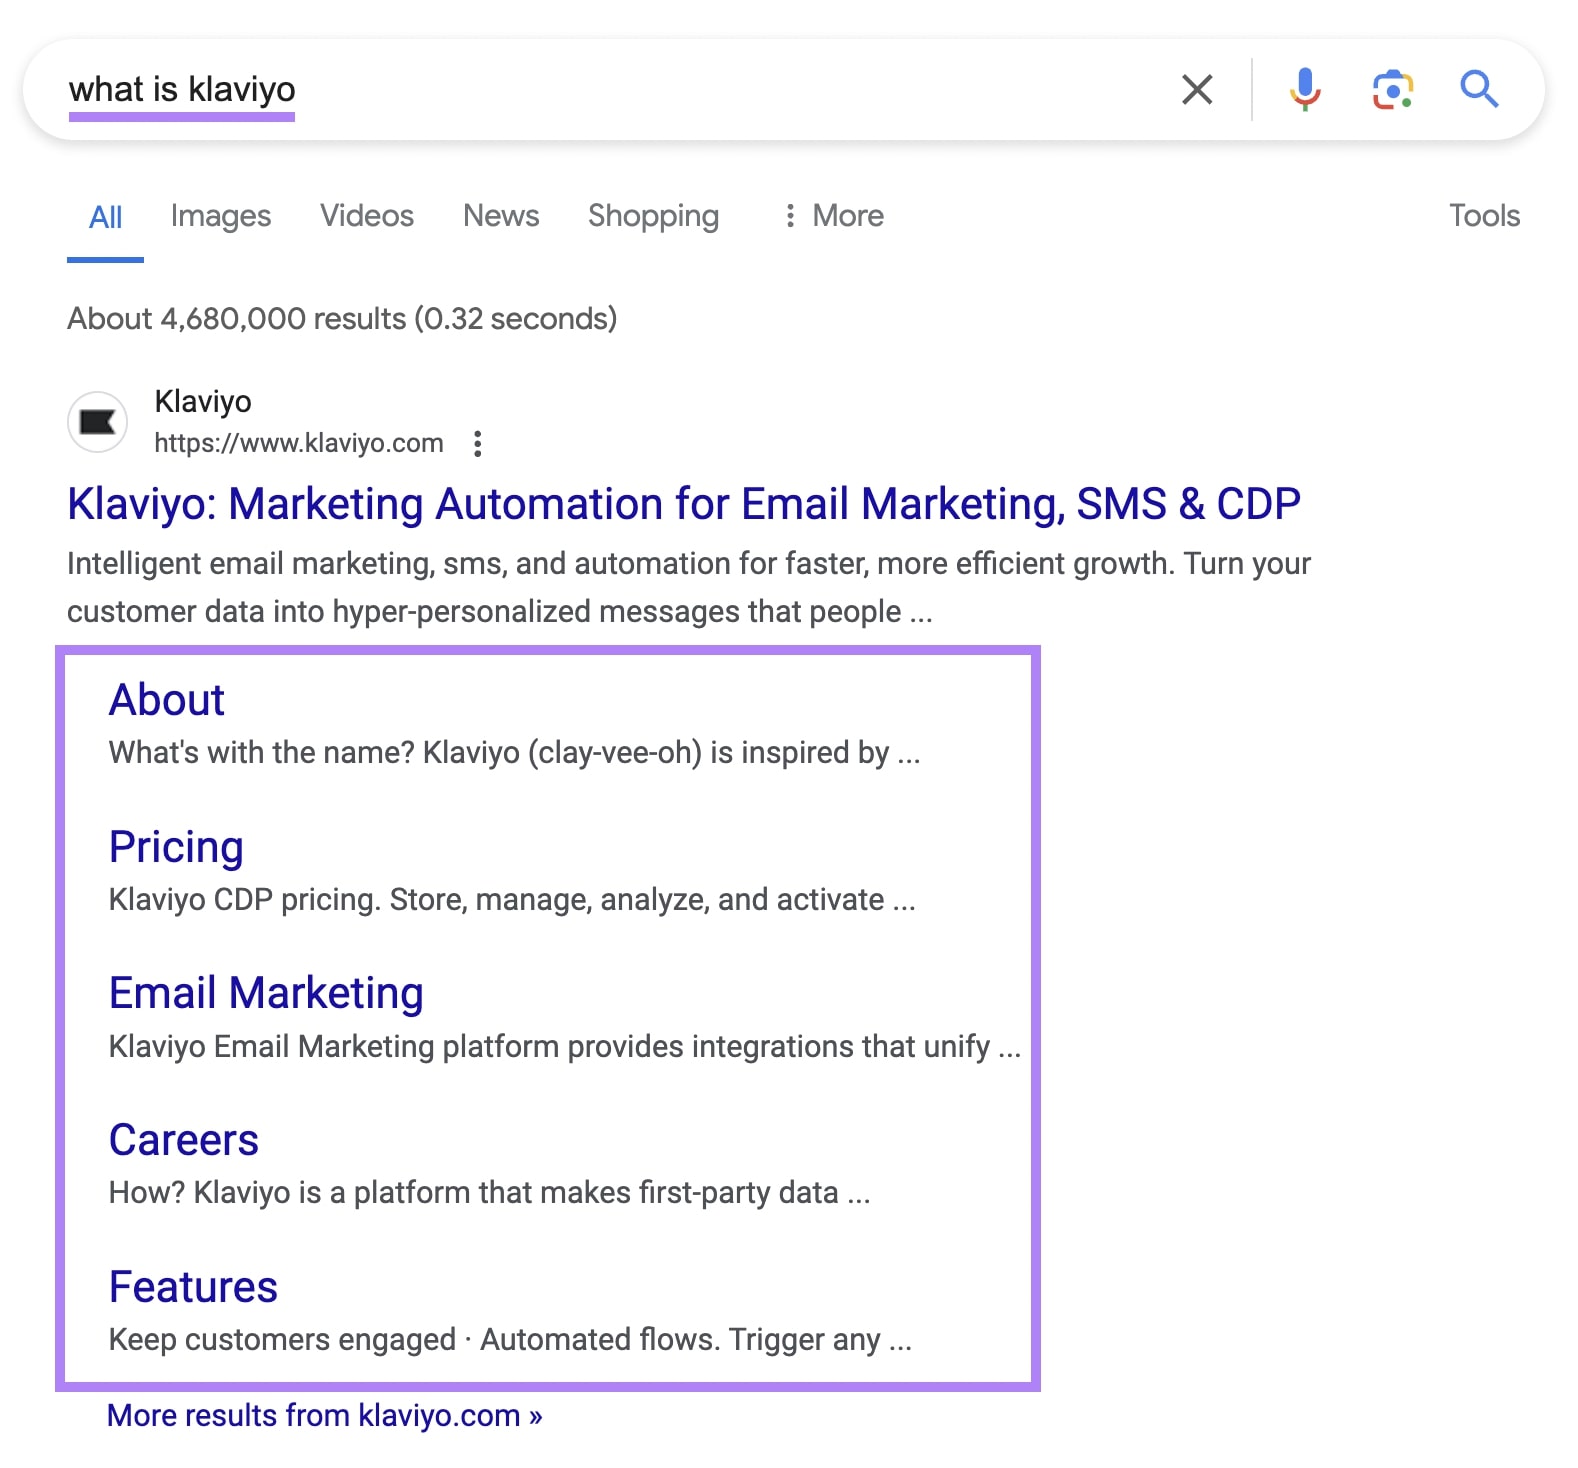 Google search results for "what is klaviyo" showing Klaviyo as the top result with sitelinks.